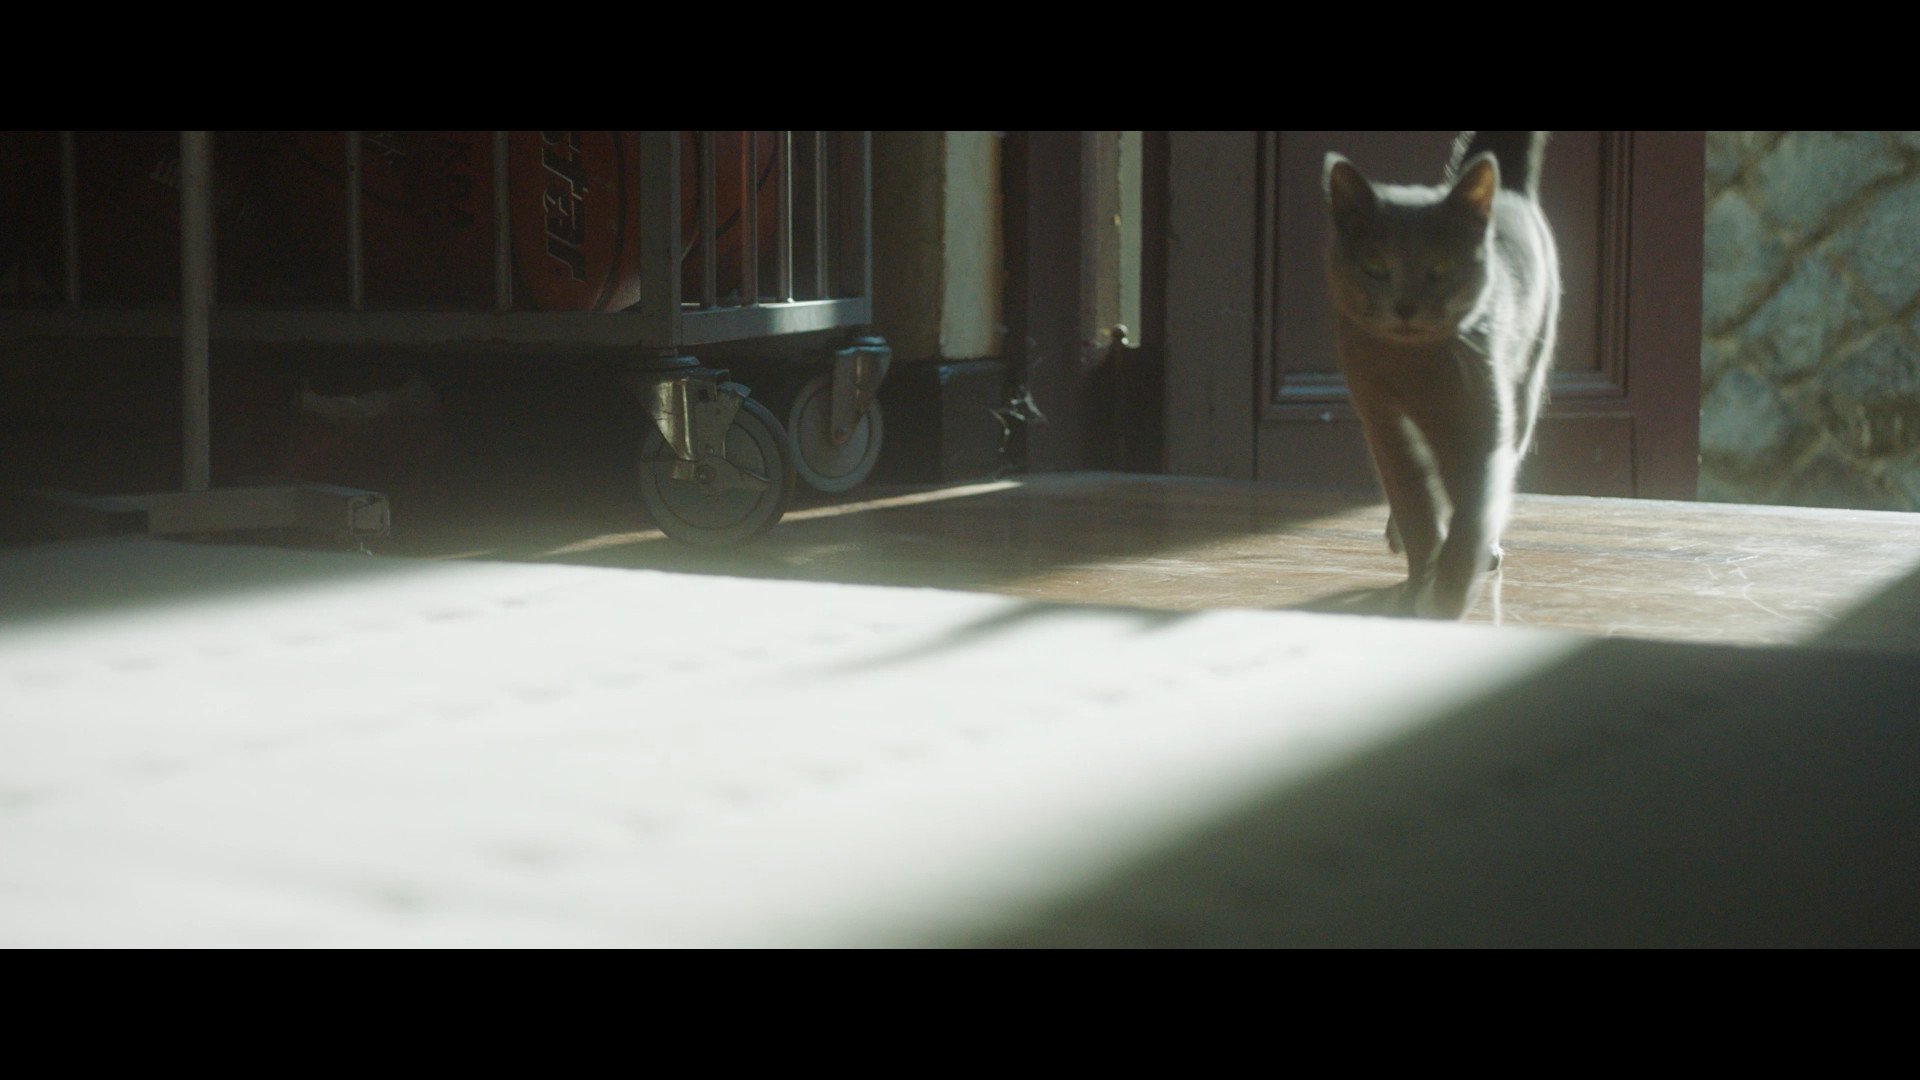 screen shot from new jeans ditto side a music video, showing the dark furred cat walking in a ray of sunshine in a school corridor